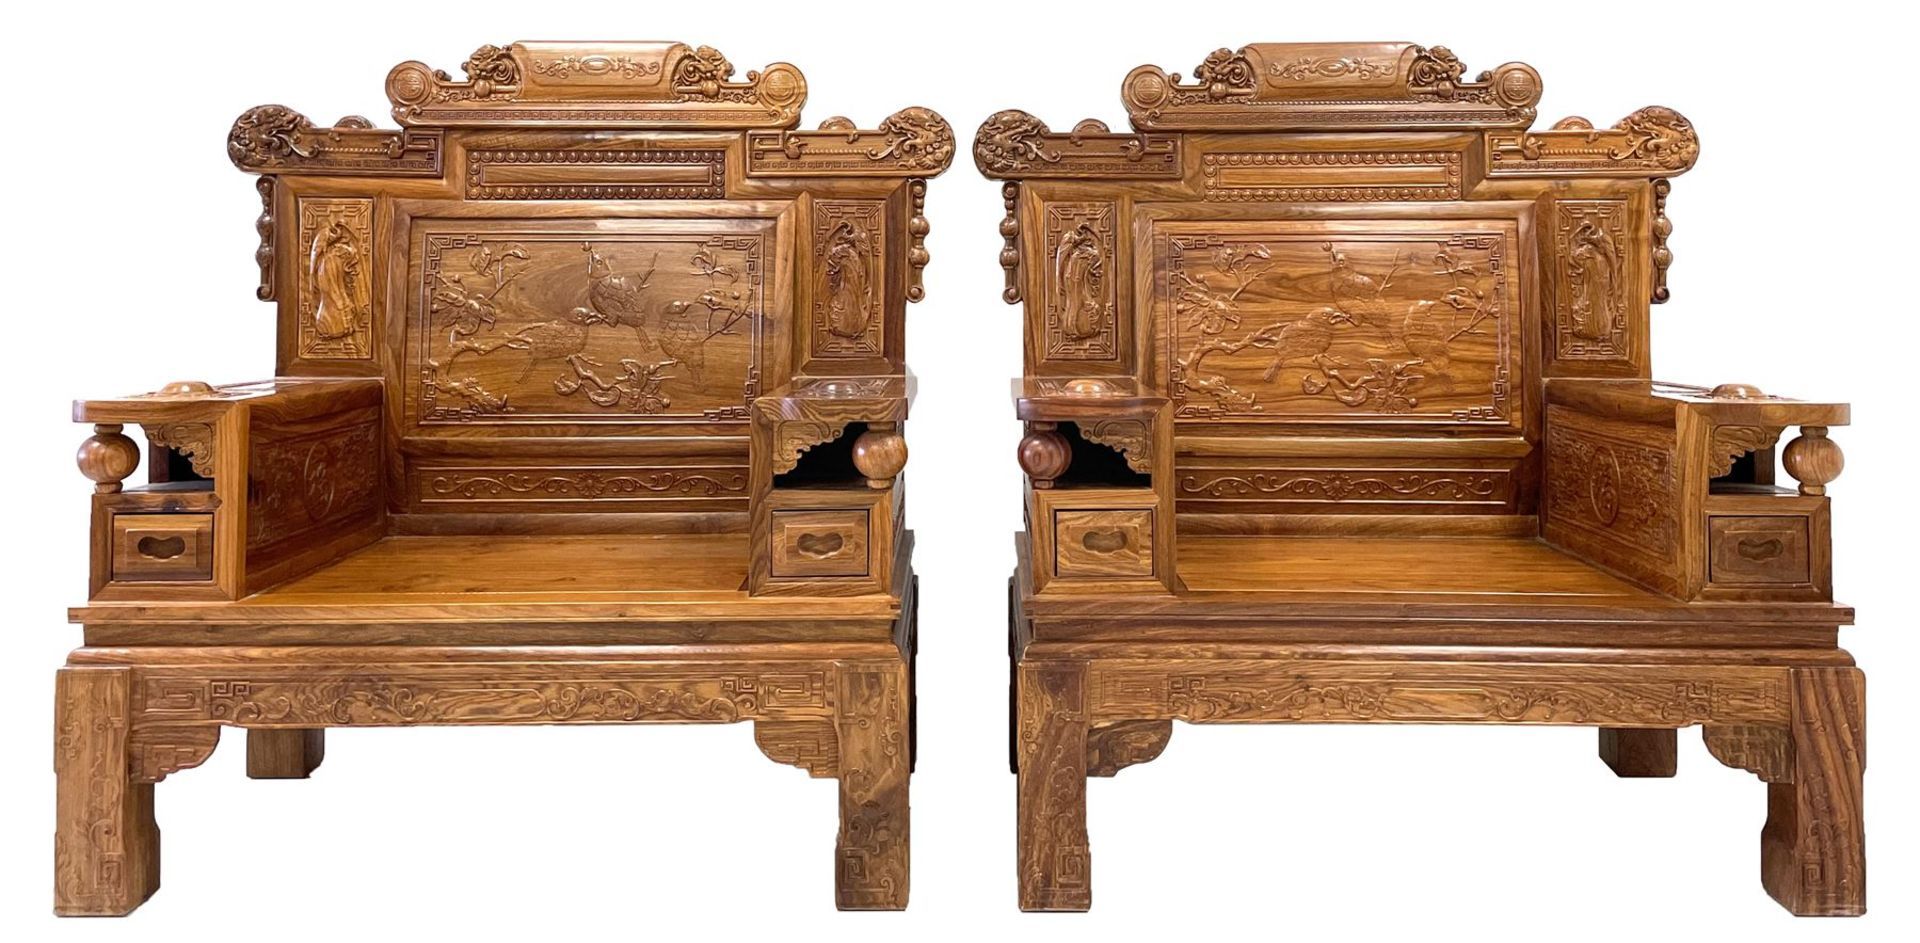 A Pair Chinese Imperial Style Hardwood Throne Chairs, The Backs Carved With Dragon Masks And Birds - Image 12 of 20